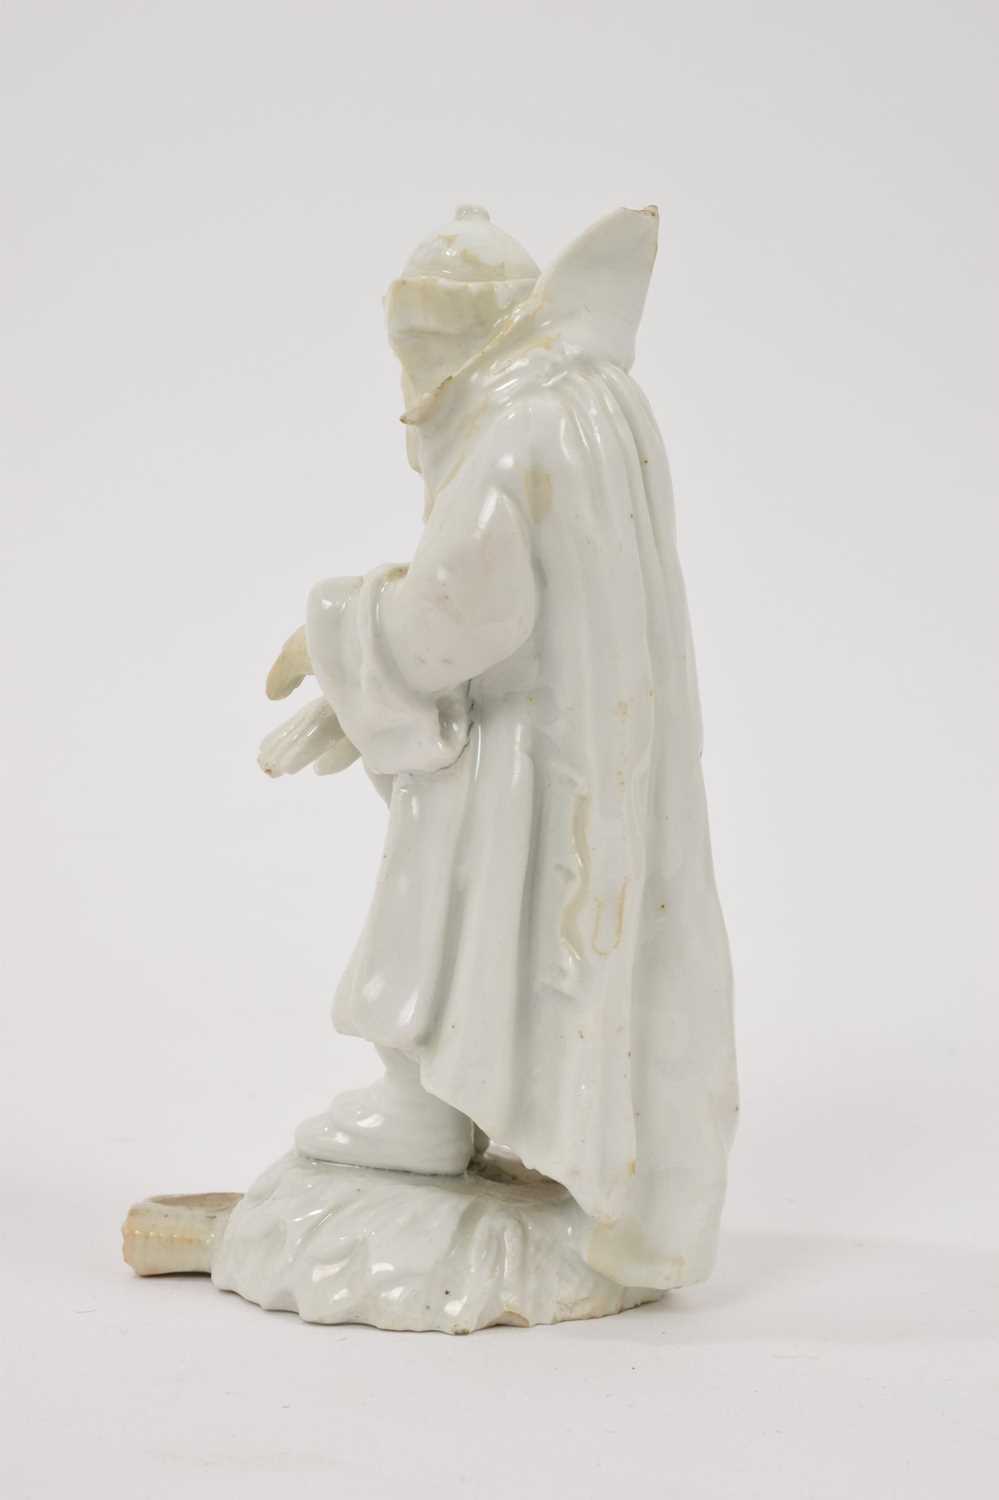 18th century white glazed porcelain figure of a man in a greatcoat, losses and restoration - Image 2 of 7